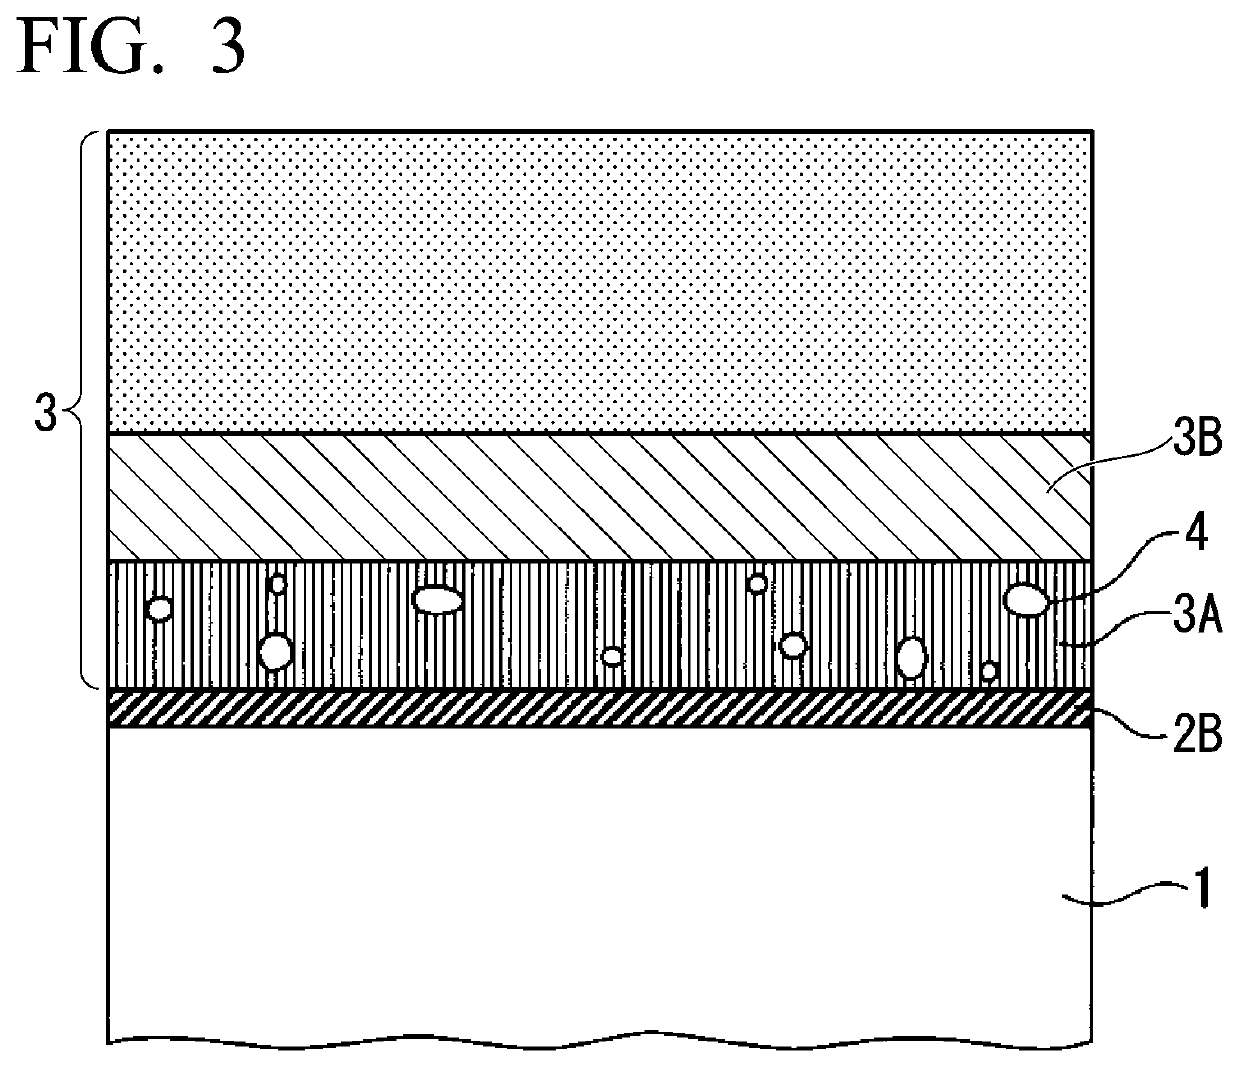 Grain-oriented electrical steel sheet and method for producing same